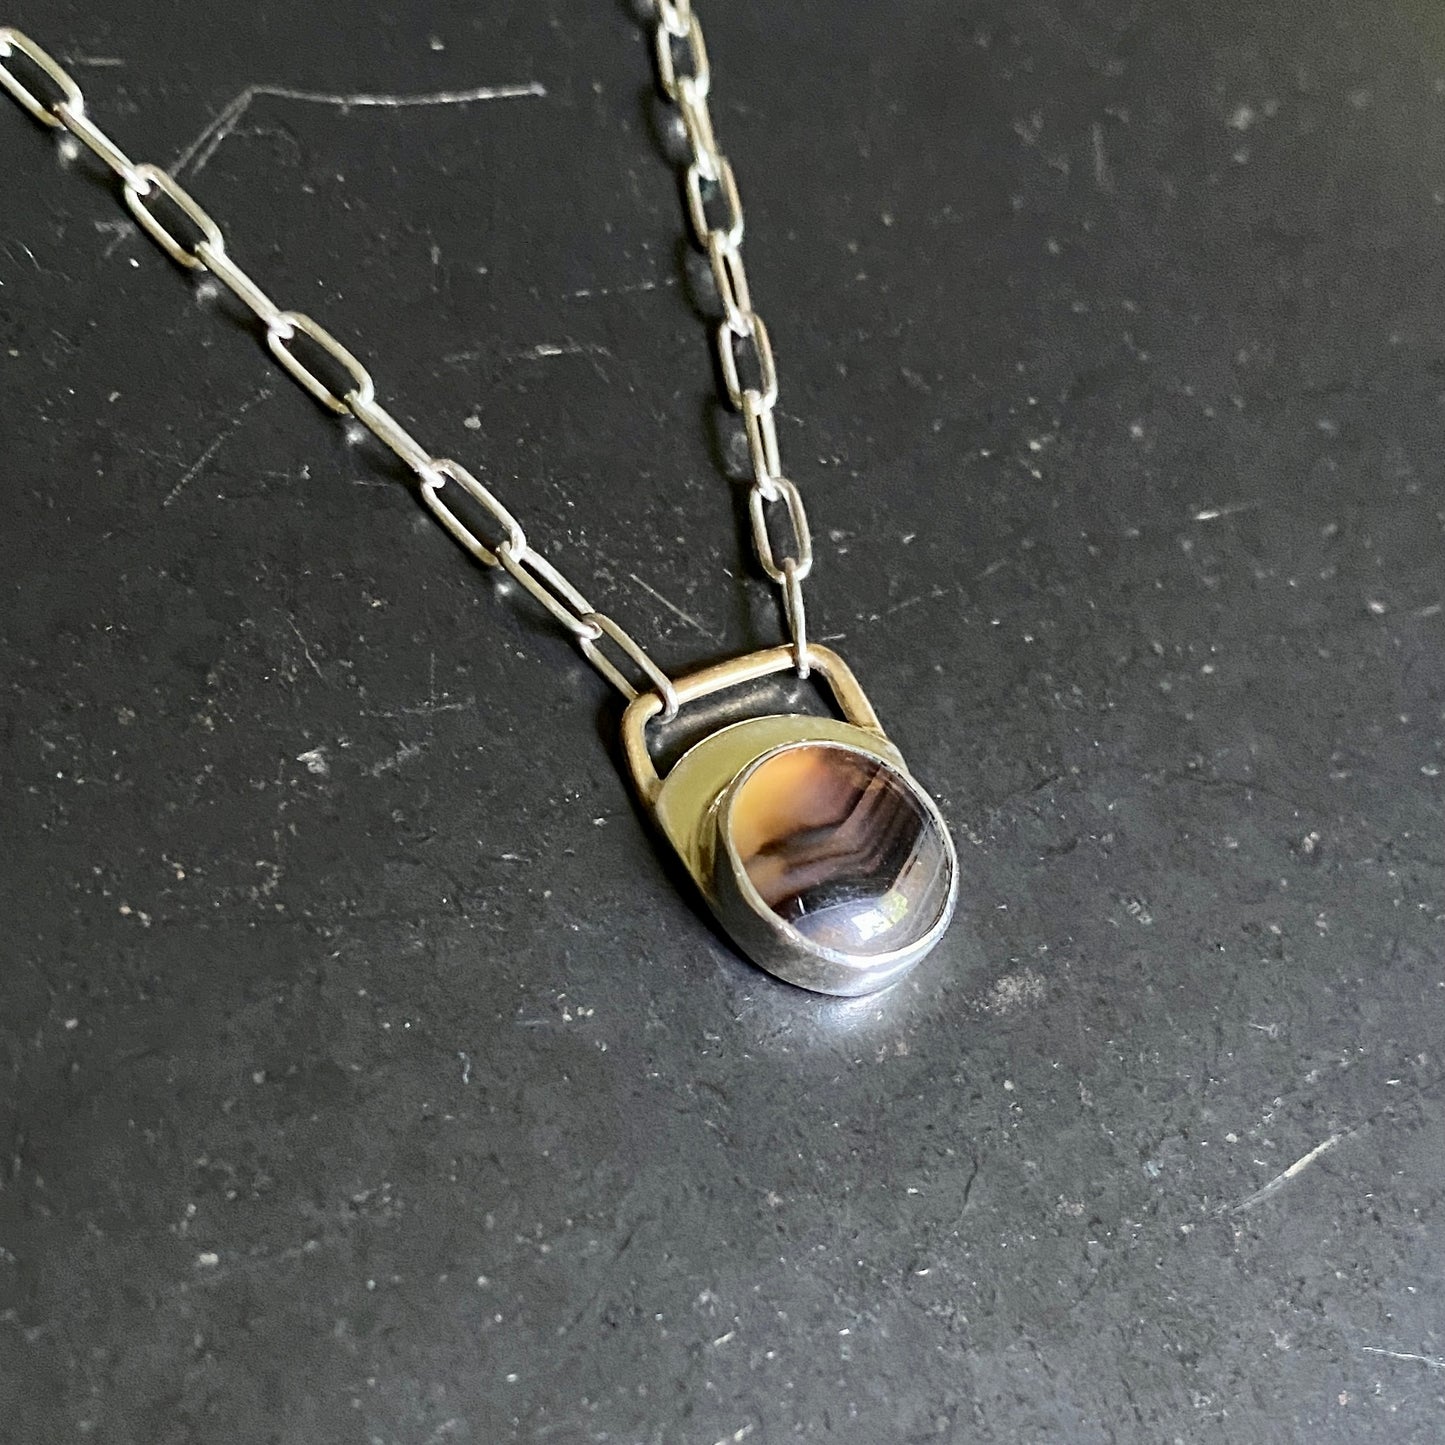 Dainty Montana Agate Necklace